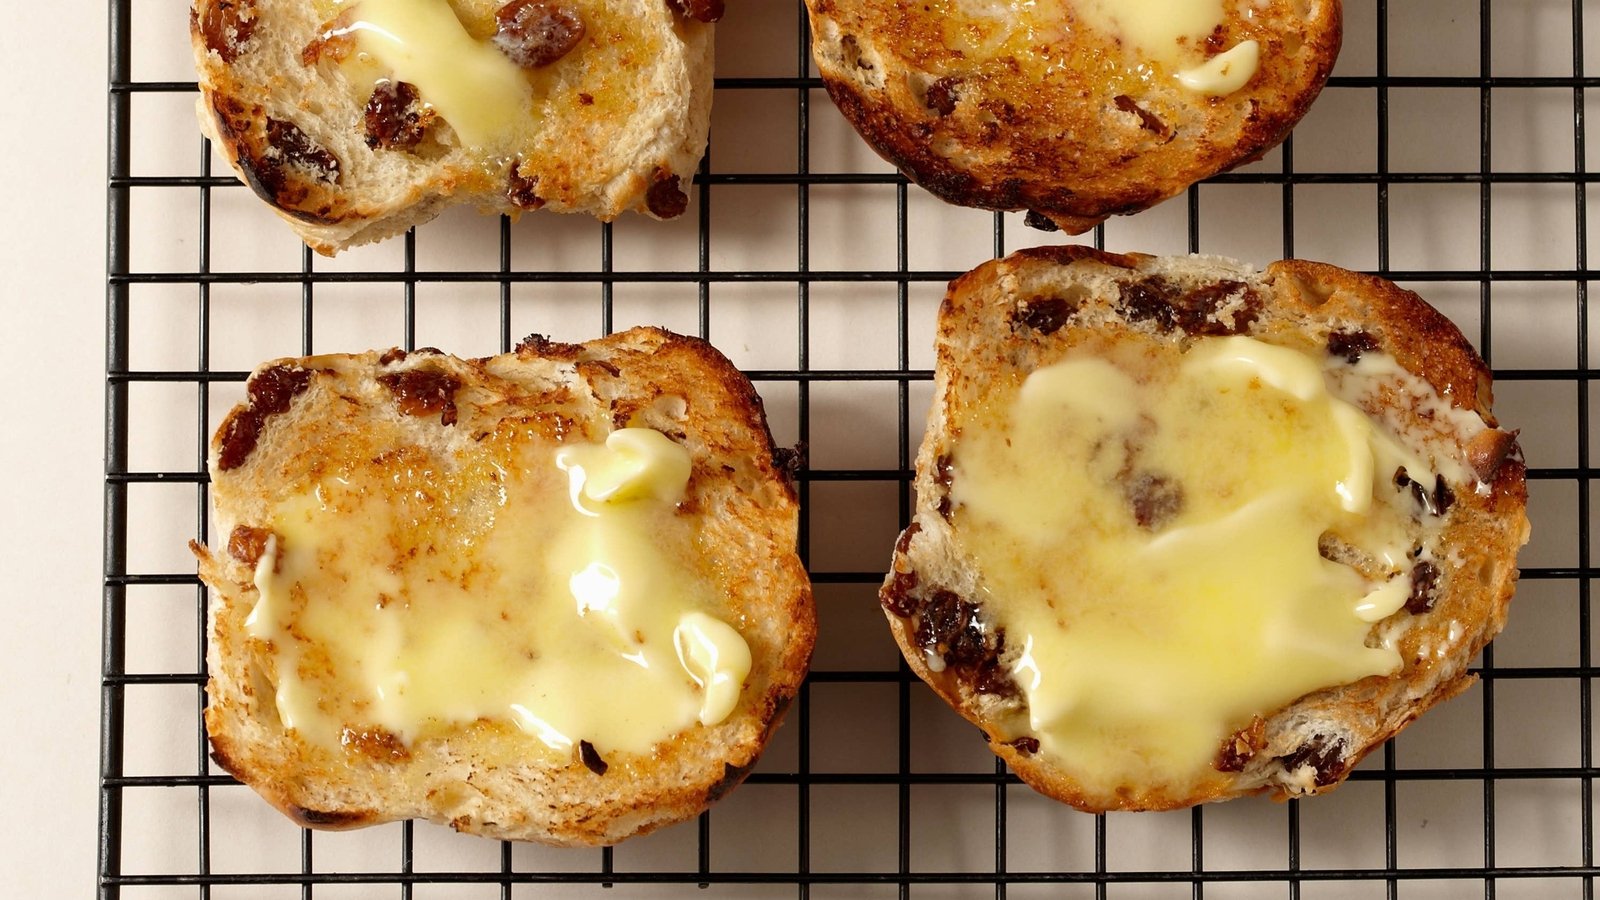 5 Things To Make With Hot Cross Buns 4215